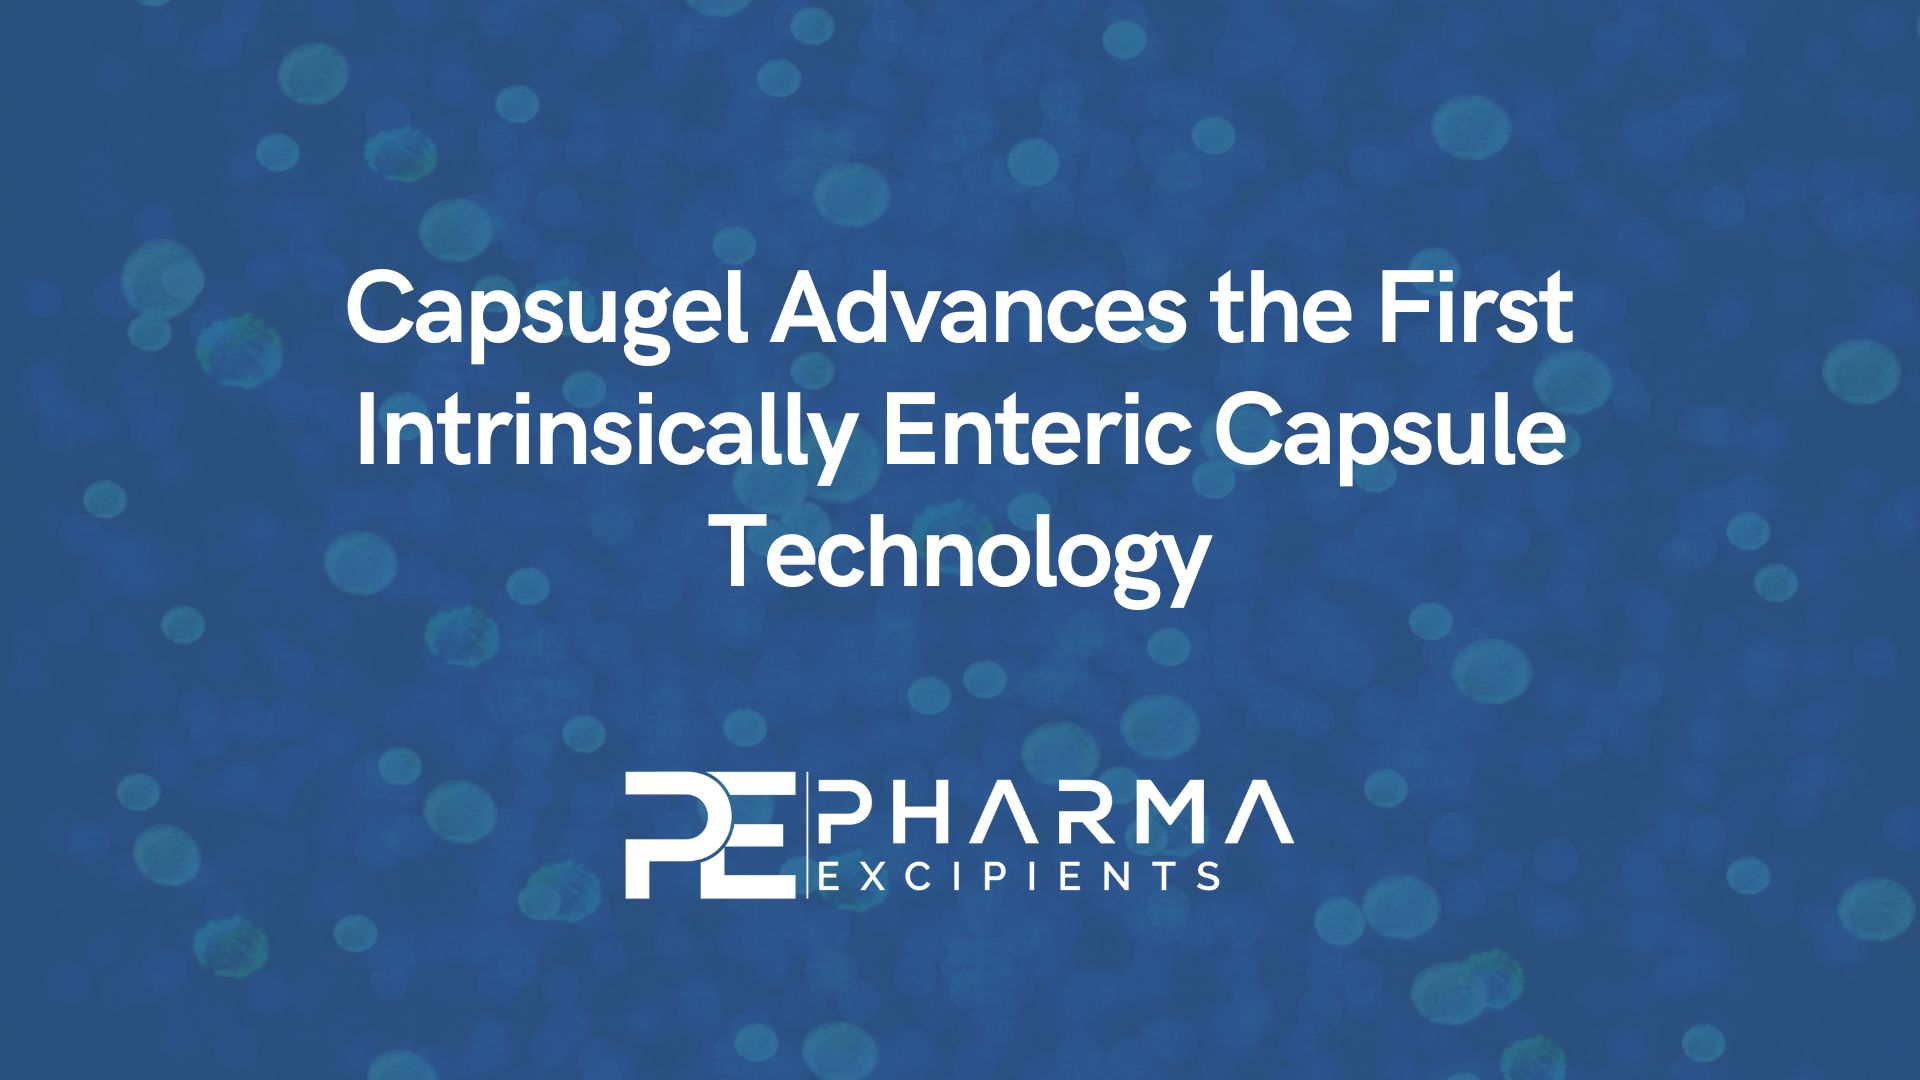 Capsugel Advances the First Intrinsically Enteric Capsule Technology